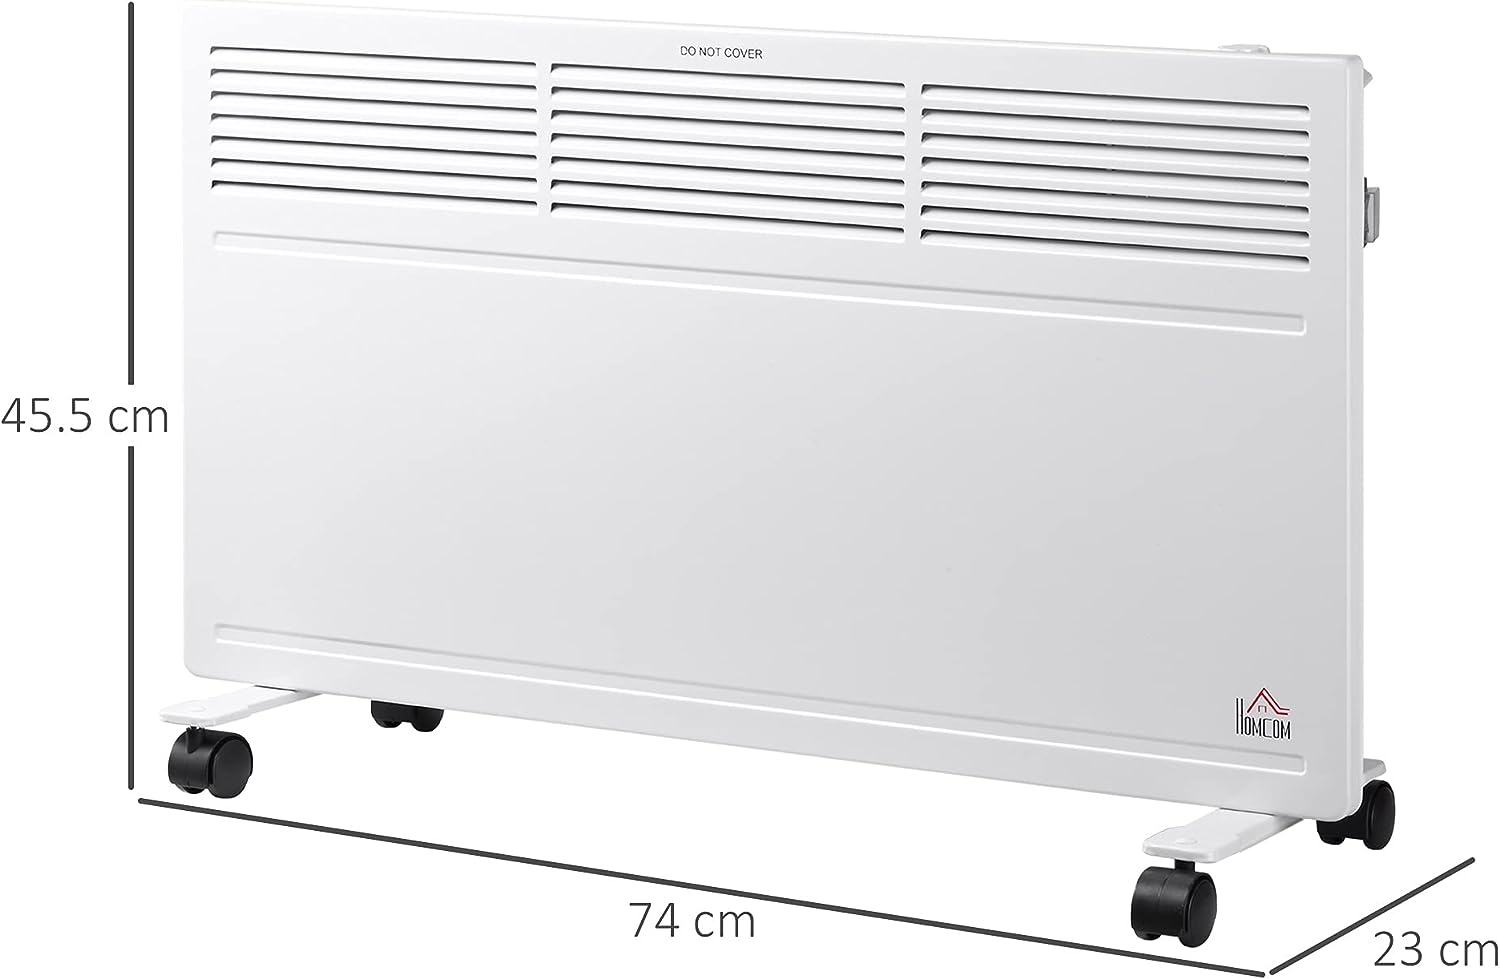 Maplin Freestanding / Wall-Mounted Convector Portable Radiator Heater with Adjustable Thermostat - maplin.co.uk